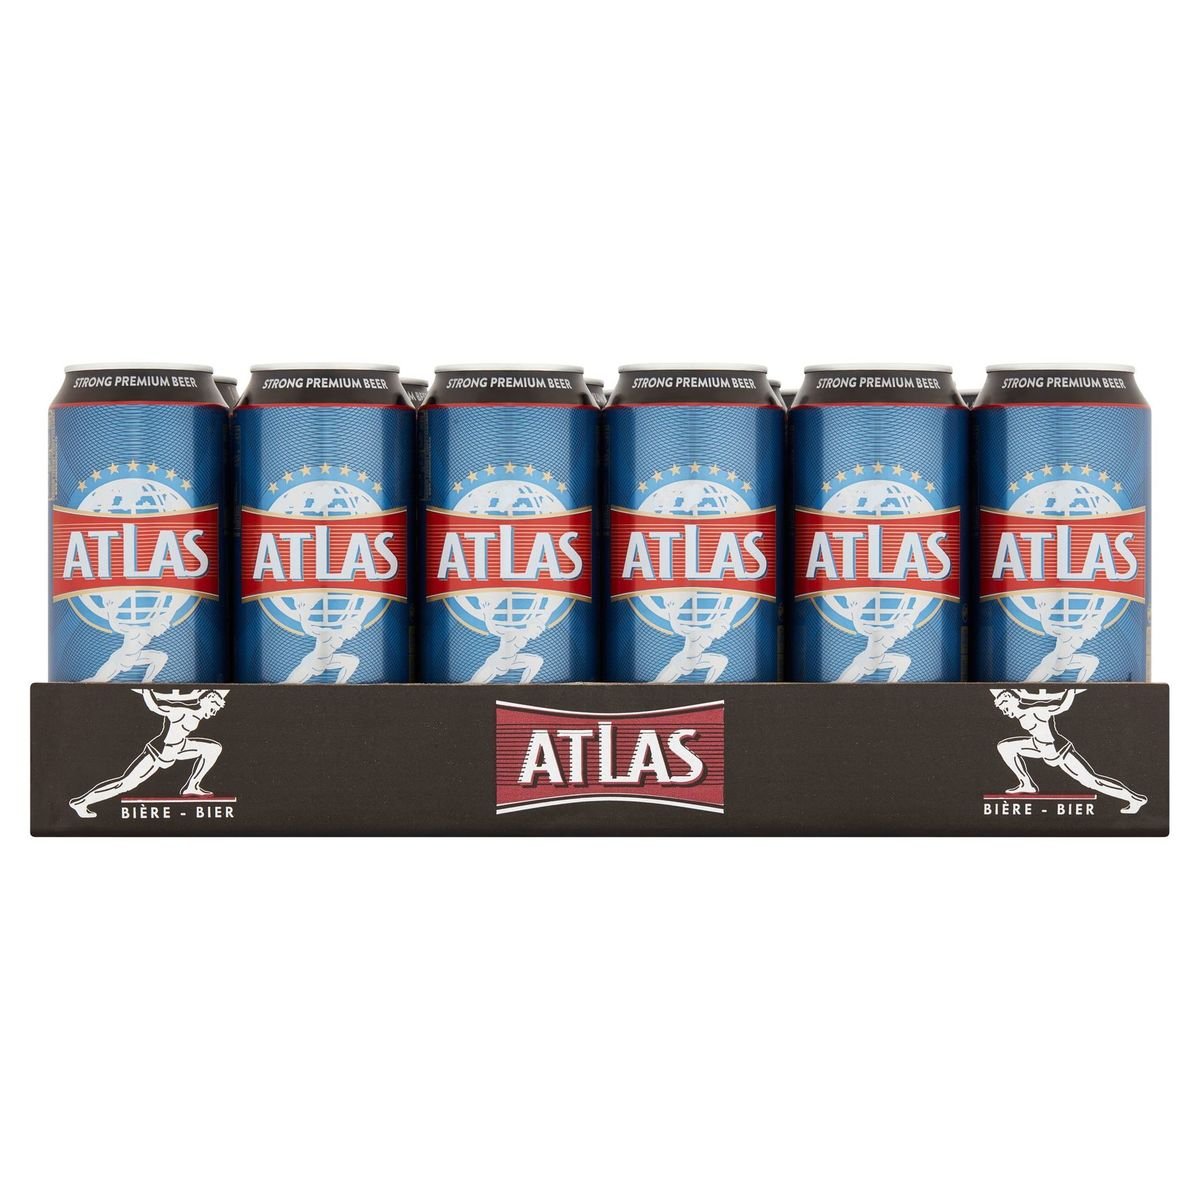 Atlas Strong Premium Beer Canettes 24x50 cl